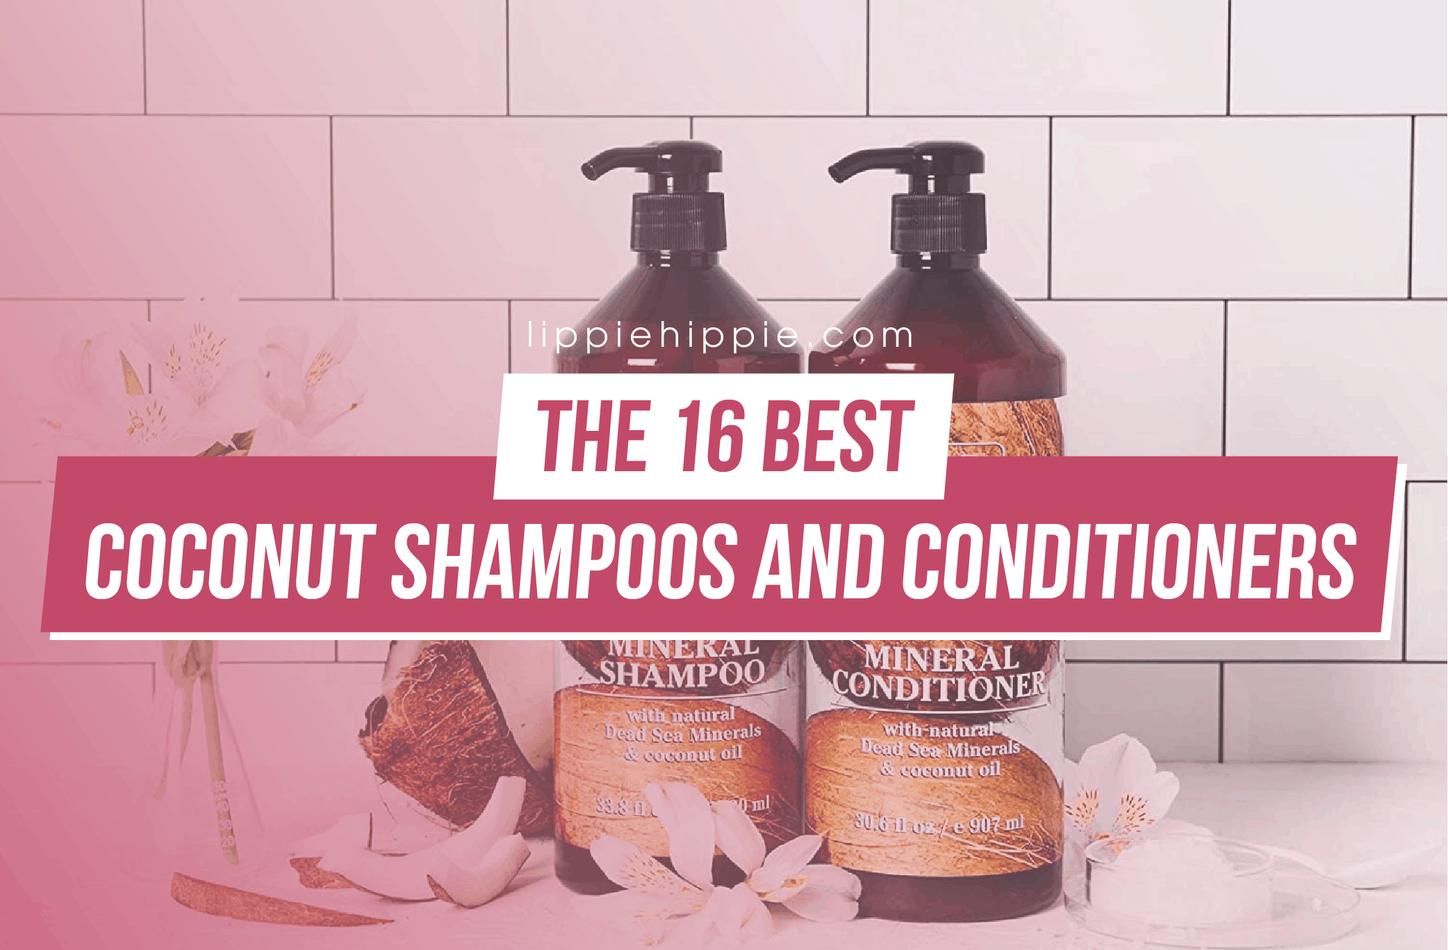 Coconut Shampoos and Conditioners